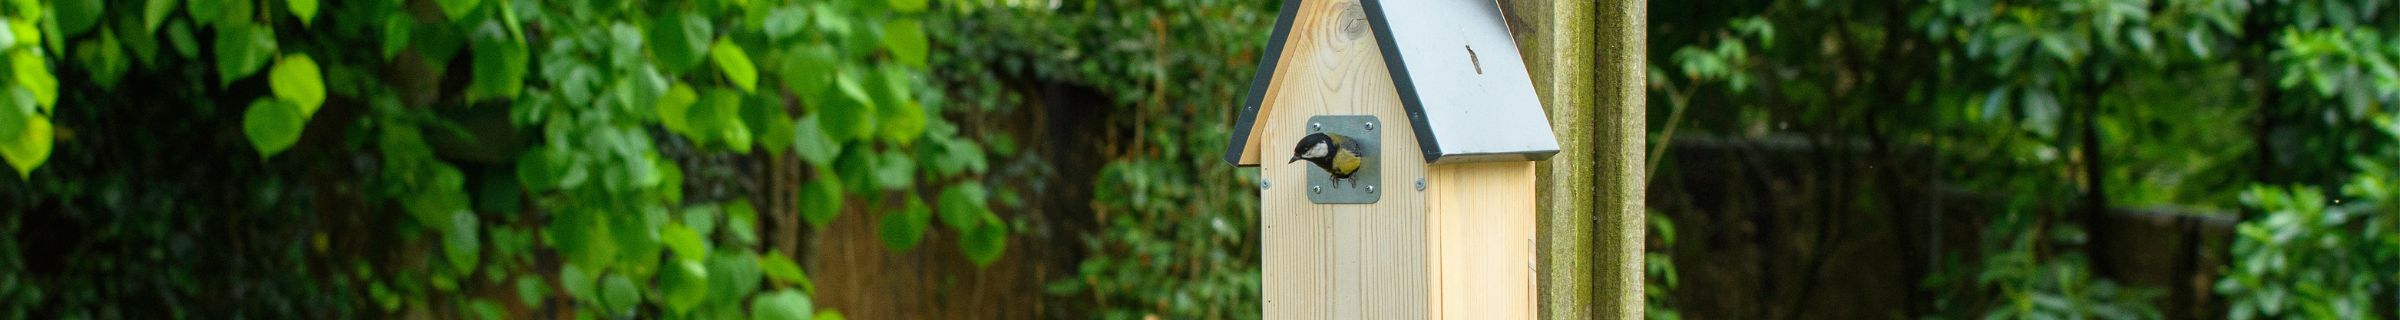 our bird nest boxes are made with the best quality materials